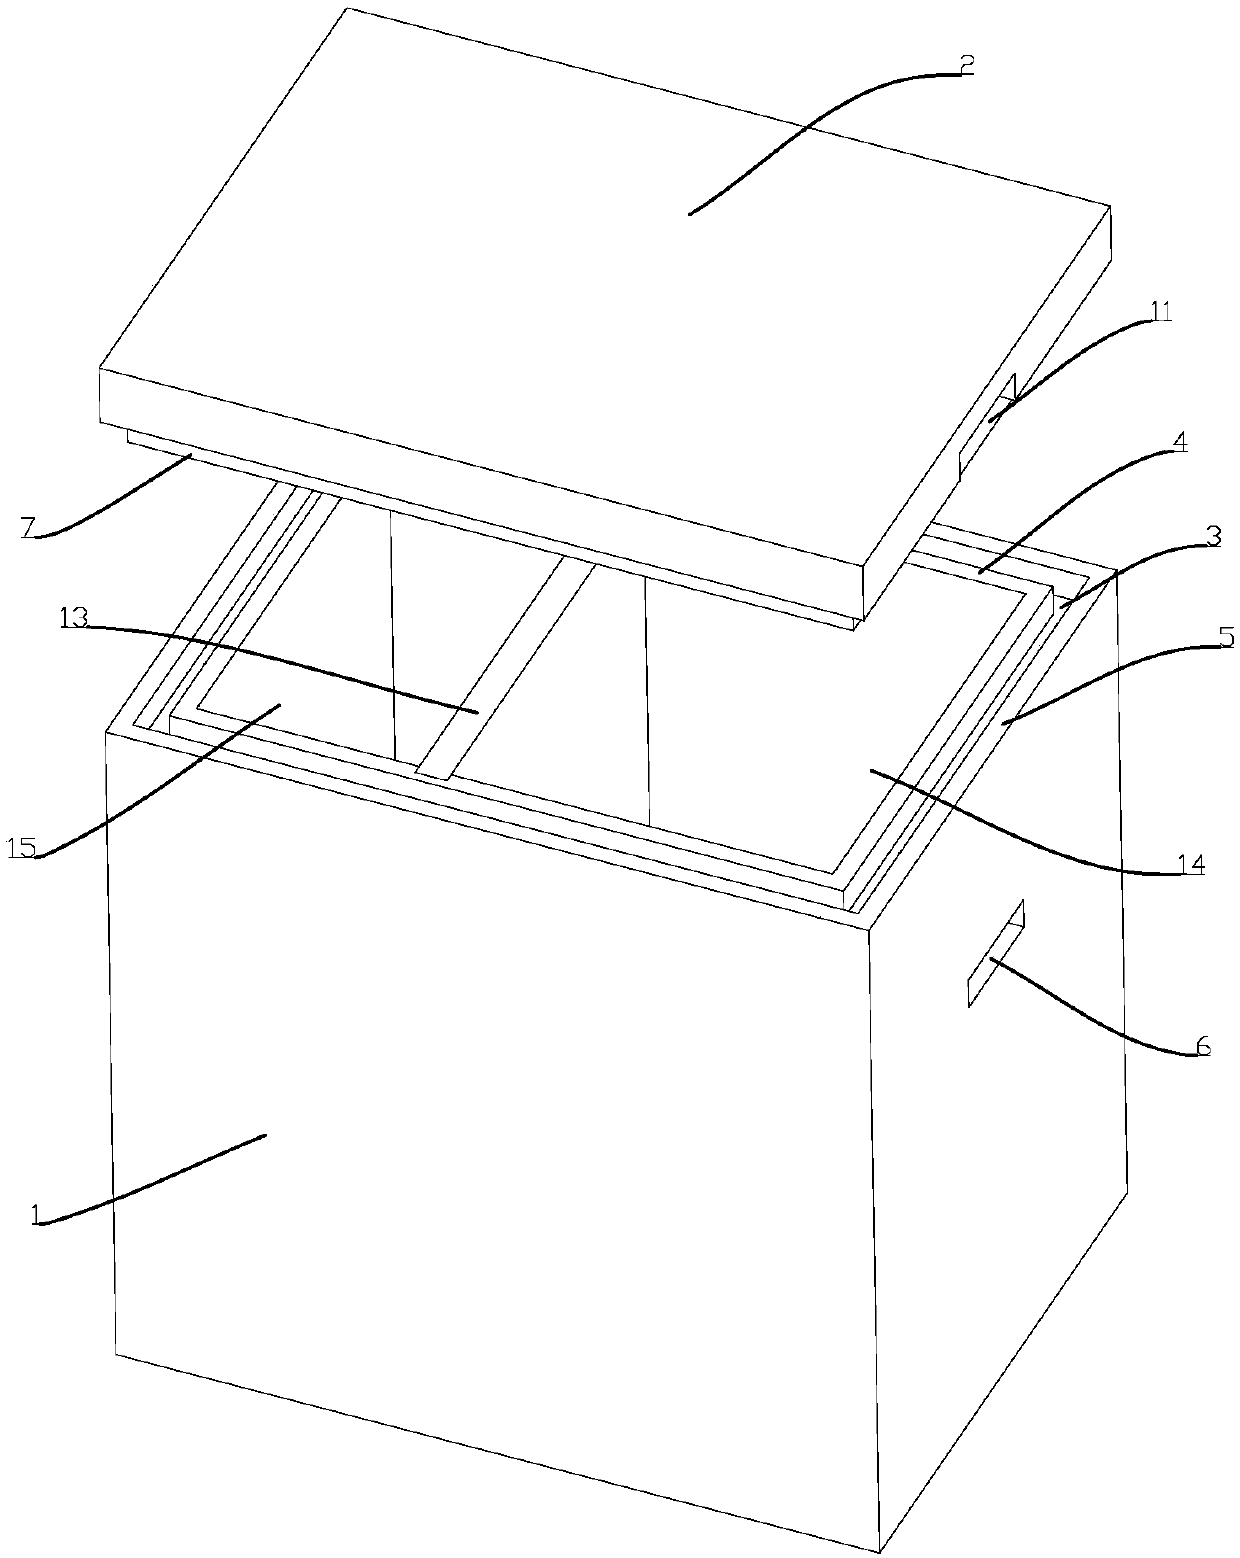 Foam insulation box with firm connection between box body and box cover